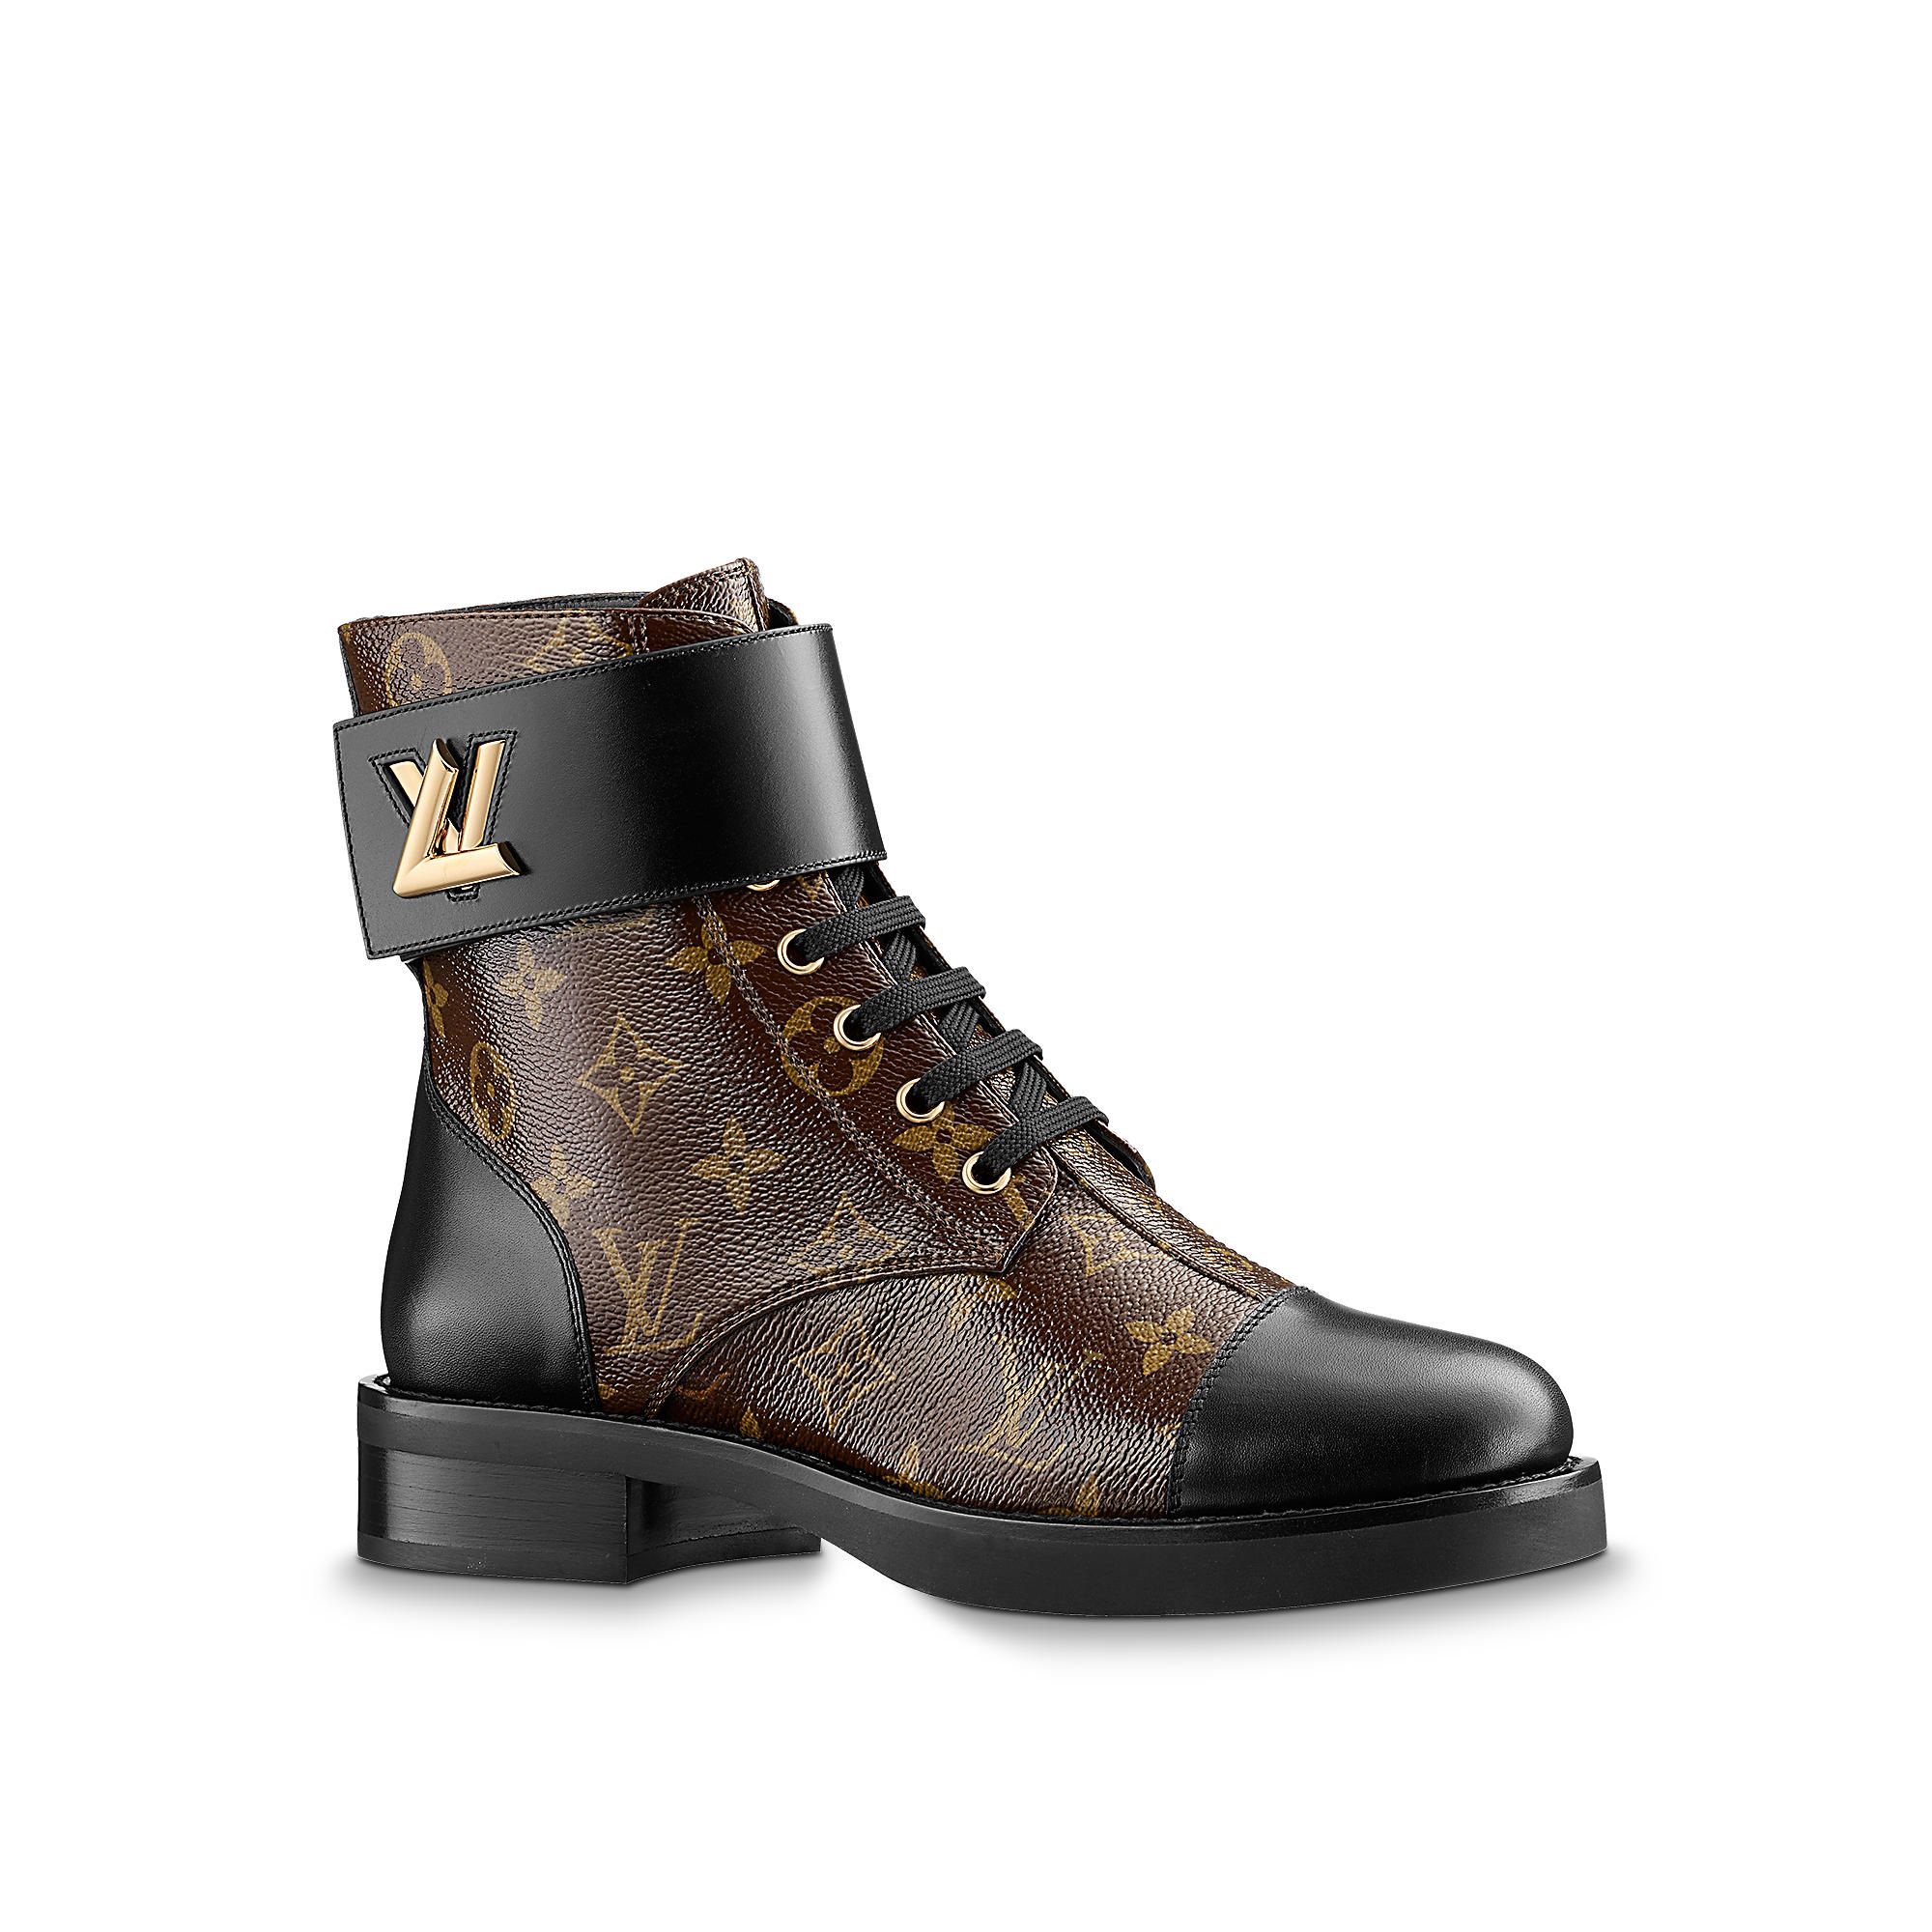 Lv outland cloth boots Louis Vuitton Brown size 9 UK in Fabric  30245055